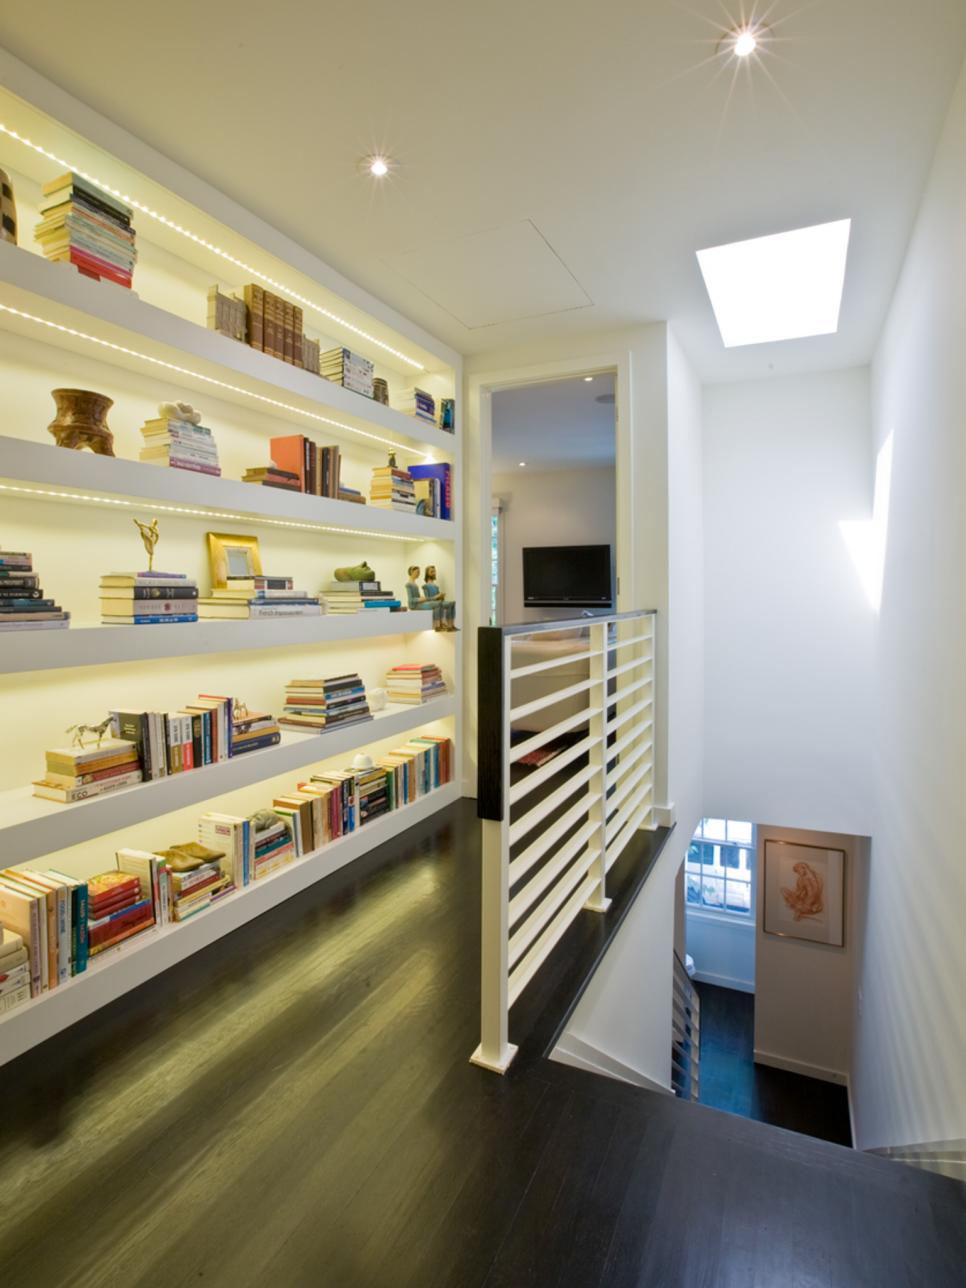 Built-In Bookshelf at the Top of a Stairway